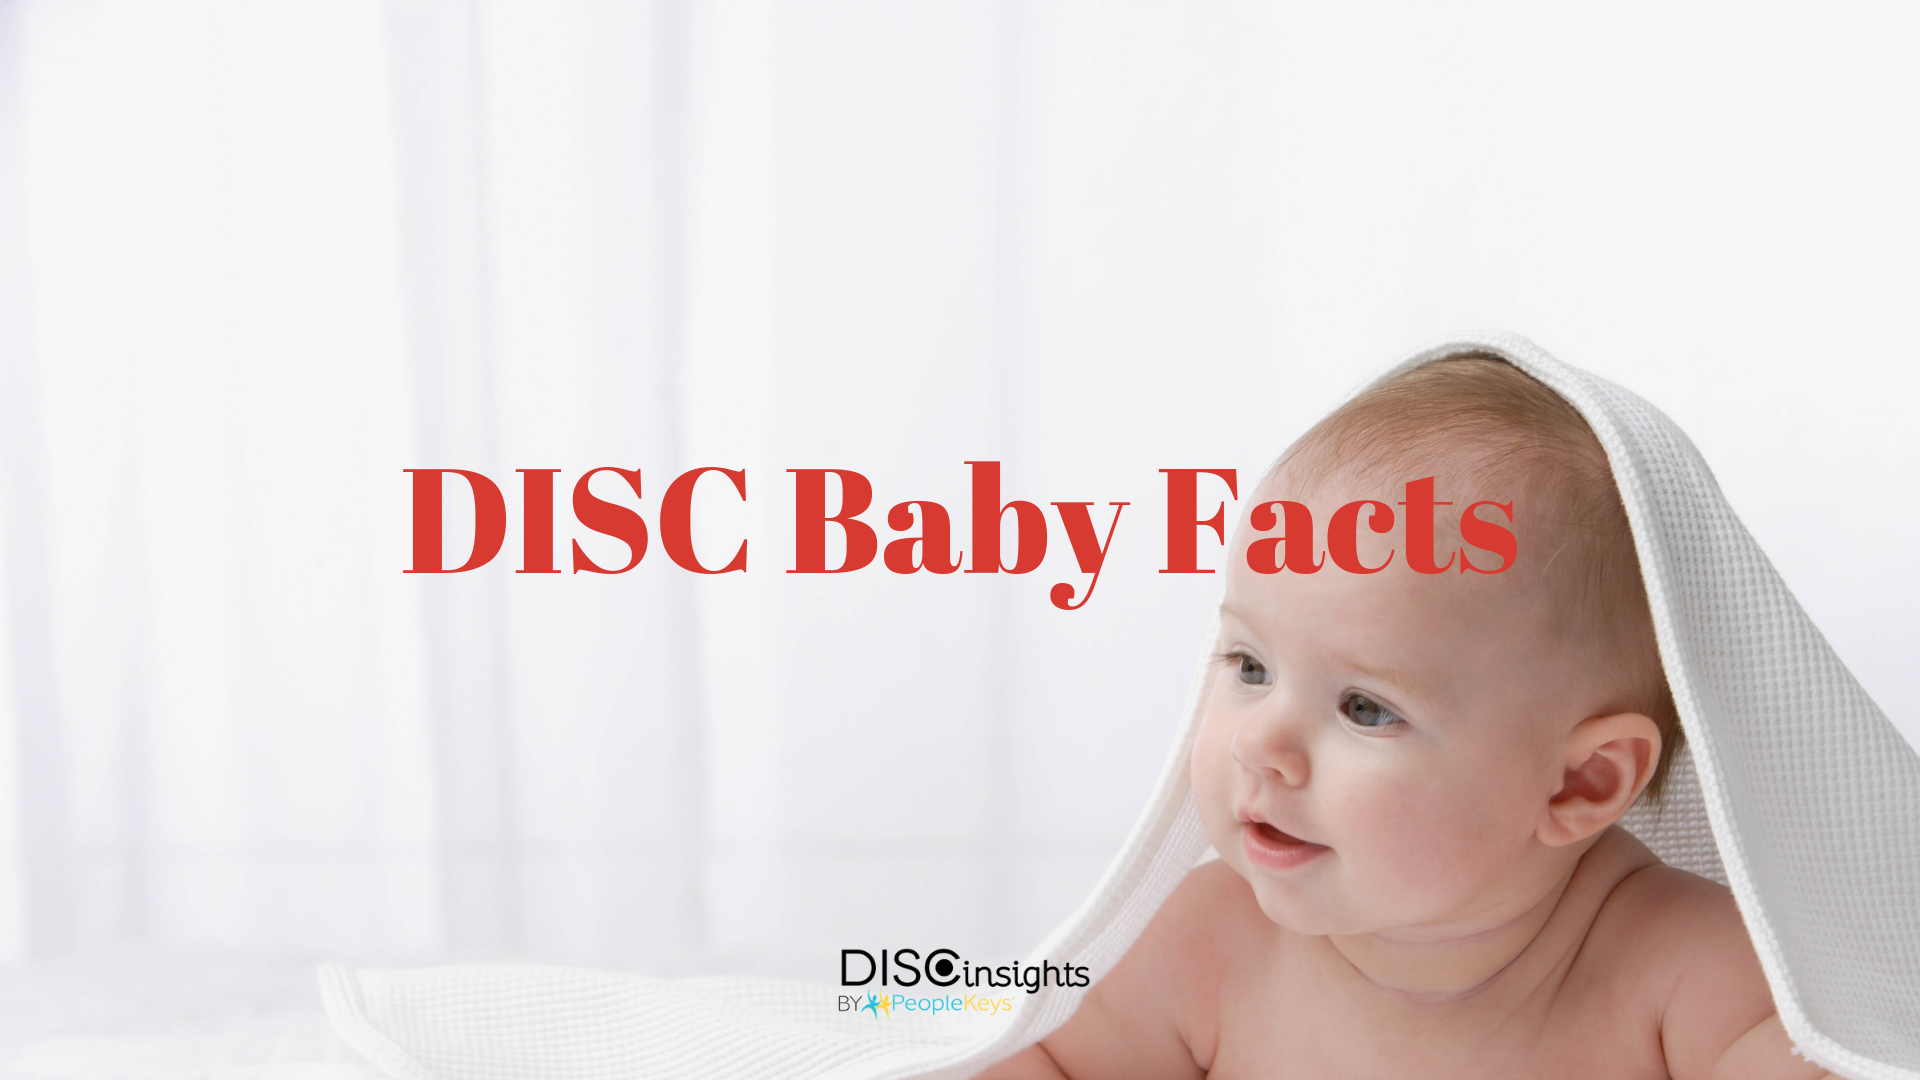 DISC Baby Facts